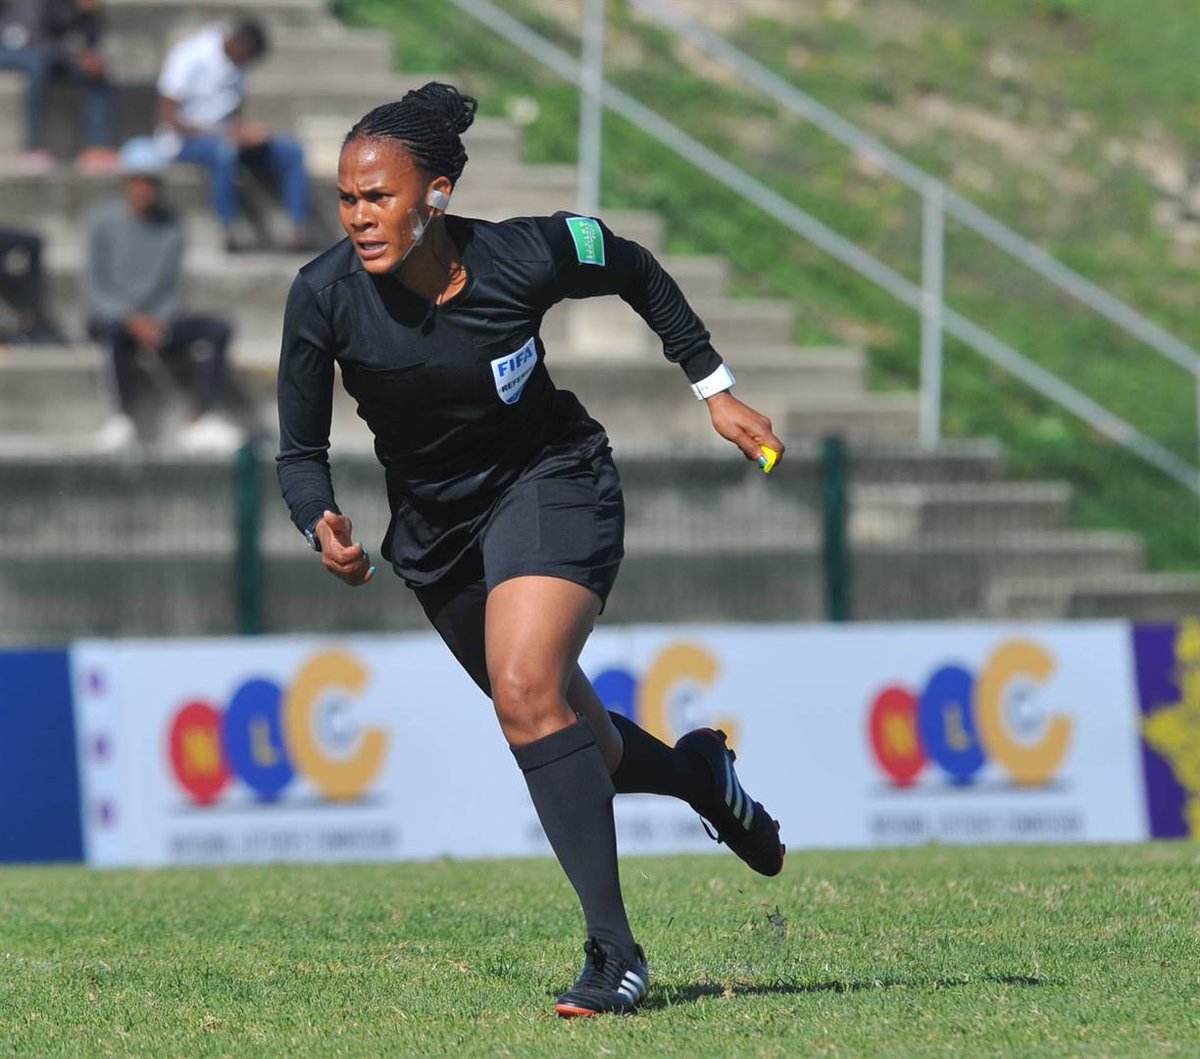 FIFA International Football Center Referee, Akhona SheRef Makalima in the celebration and honouring the legends & icons of beautiful game @gsport4girls

@Akhona_sheref #PowerofRecognition